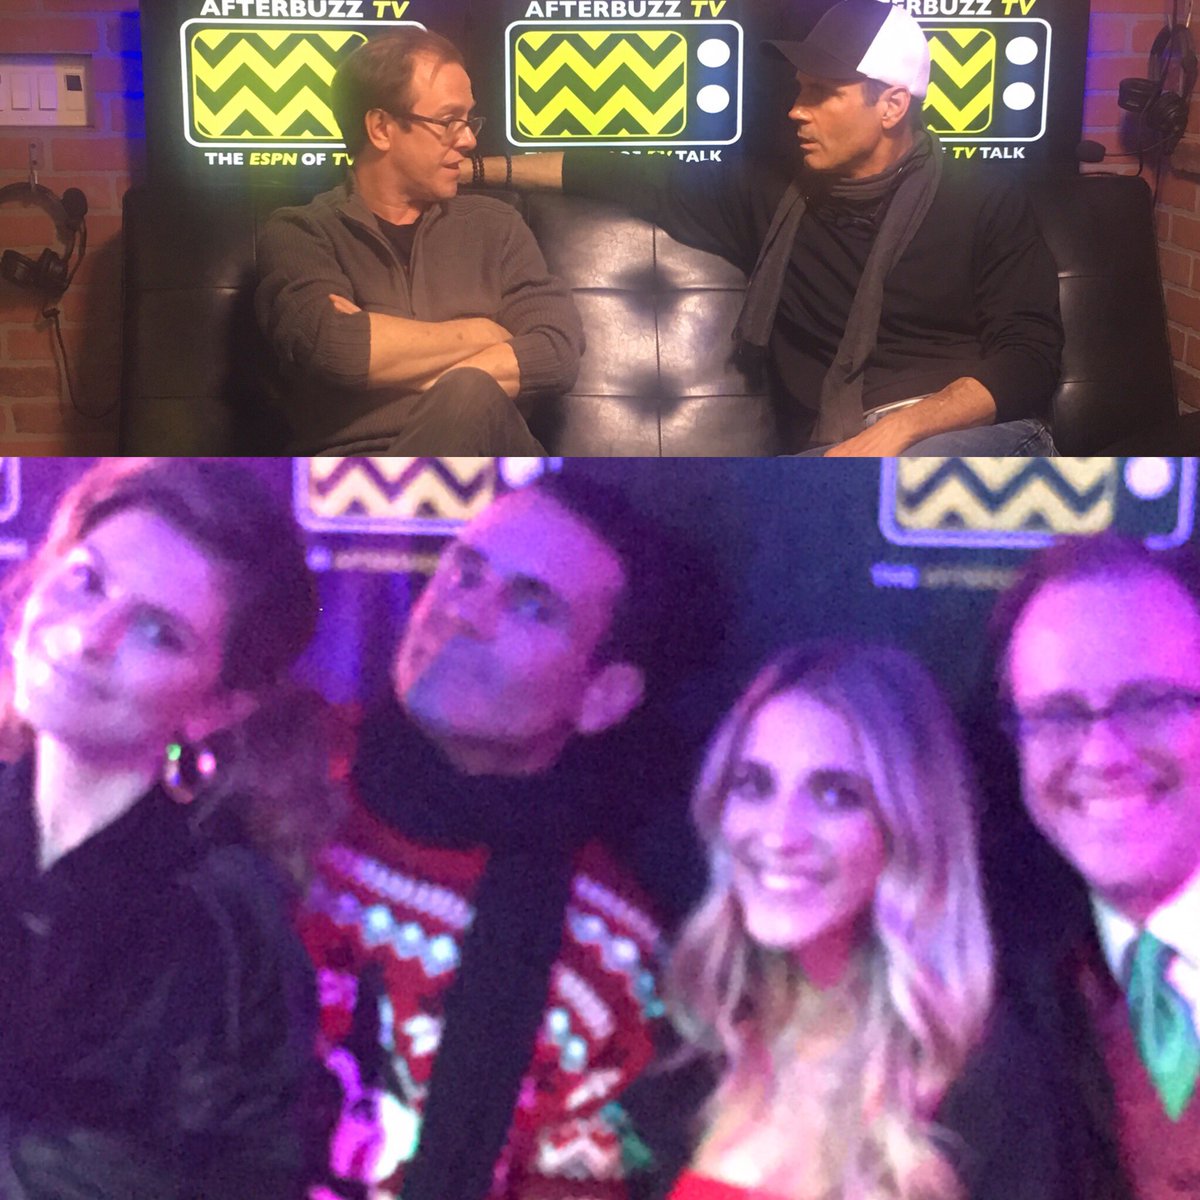 ANNOUNCEMENT: Last year I met Keven Undergaro @undergaro, Owner and Co-CEO, with his partner and wife Maria Menounos @mariamenounos of AFTERBUZZ TV. We all hit it off! Now we have a new project that I will announce tomorrow! And I get to work with Roxy Striar @roxystriar!